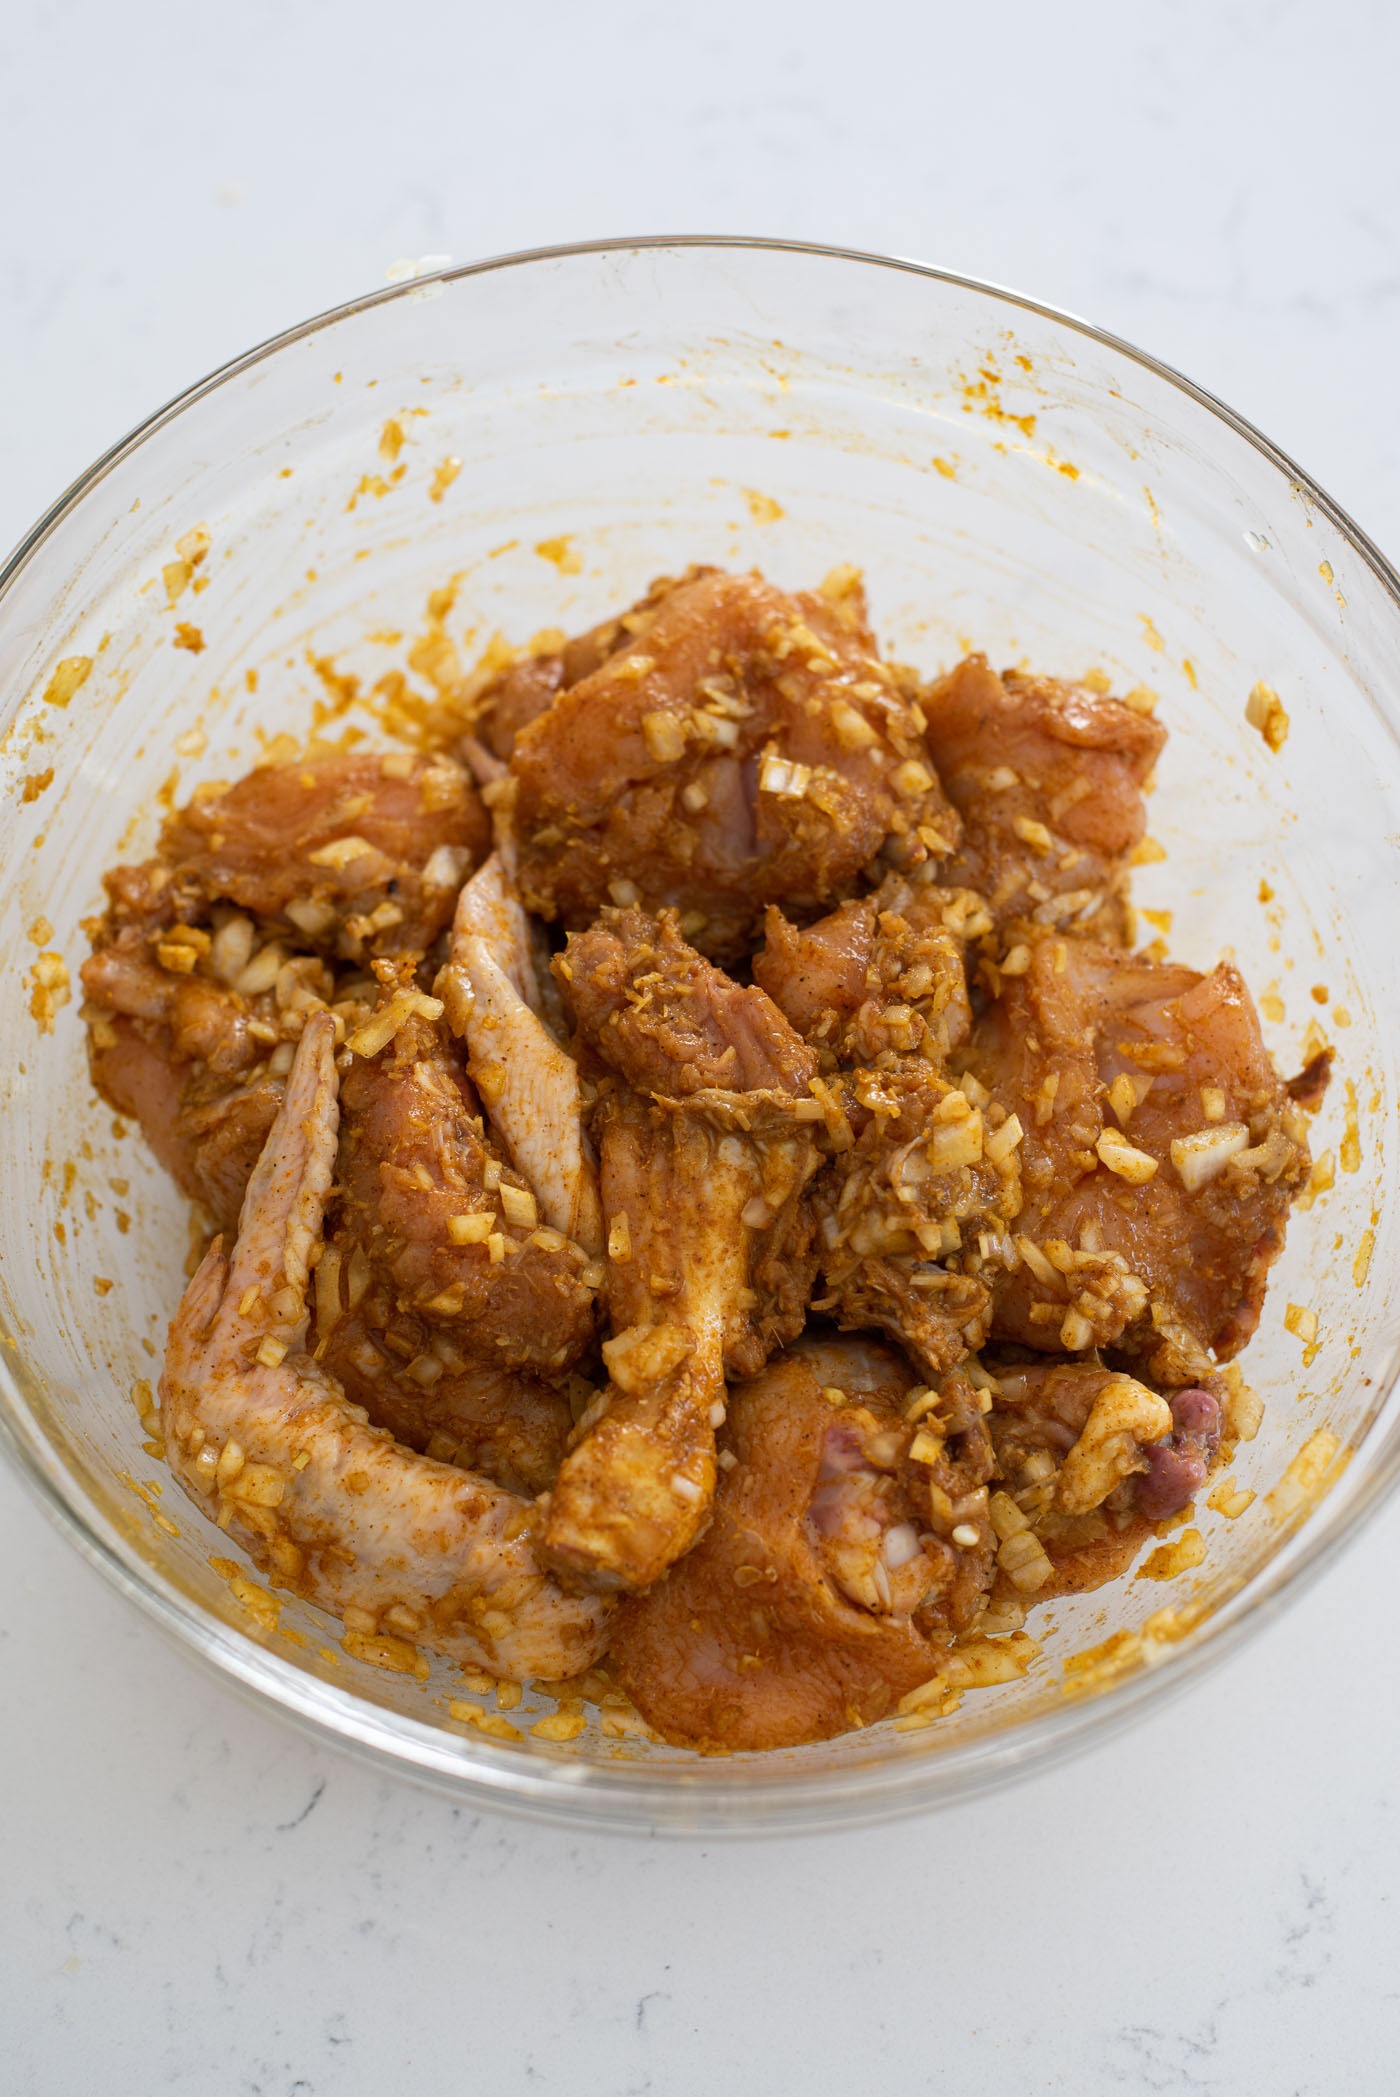 Chicken parts are coated with curry powder and lemongrass paste in a bowl